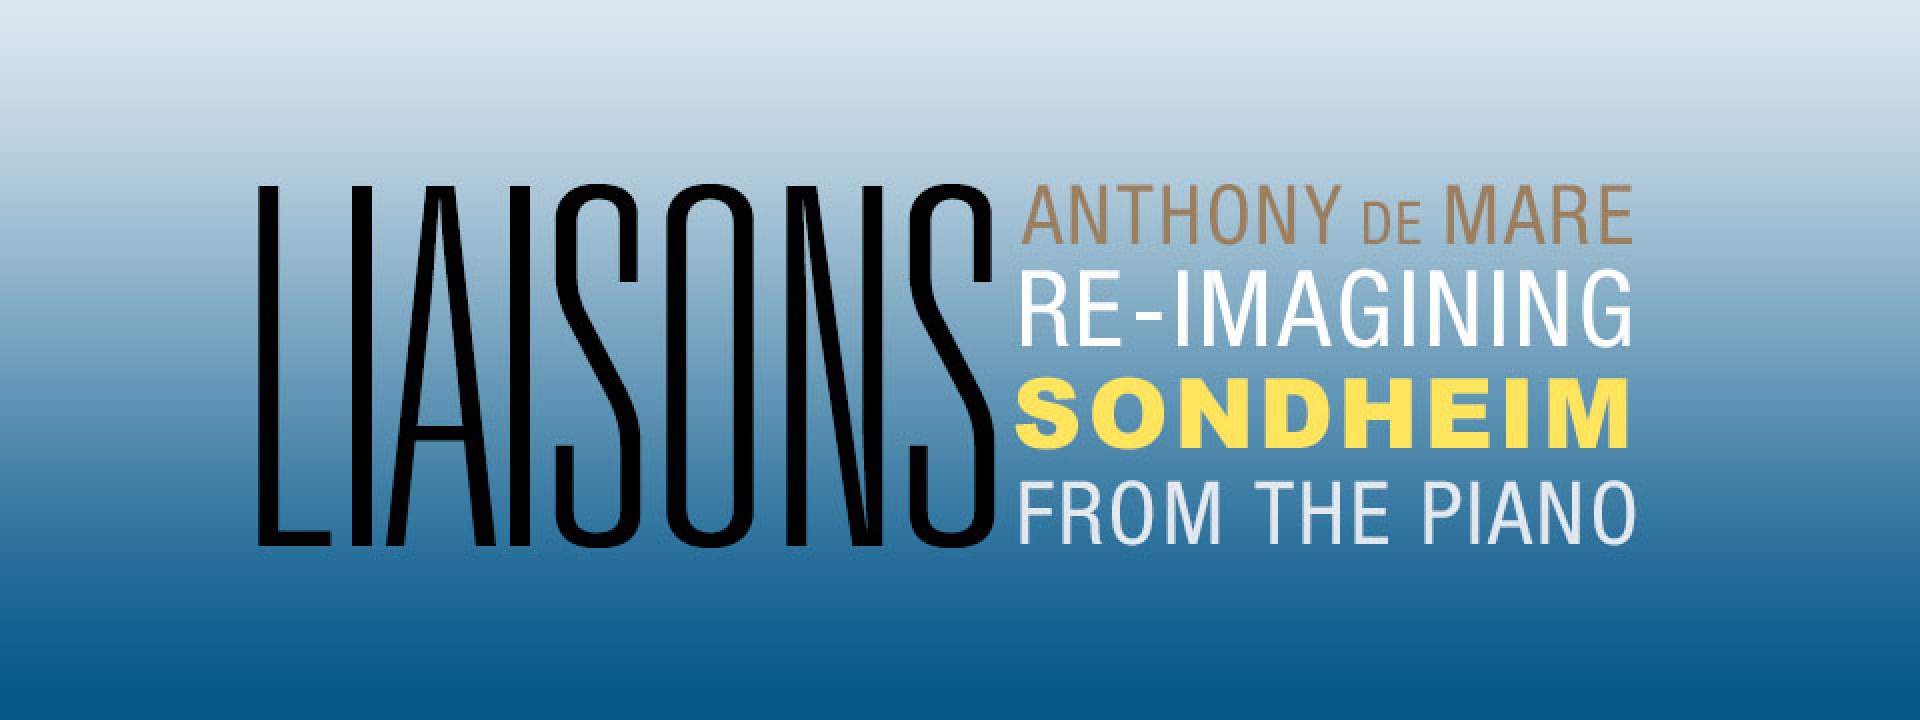 THE LIAISONS PROJECT: RE IMAGINING SONDHEIM WITH ANTHONY DEMARE